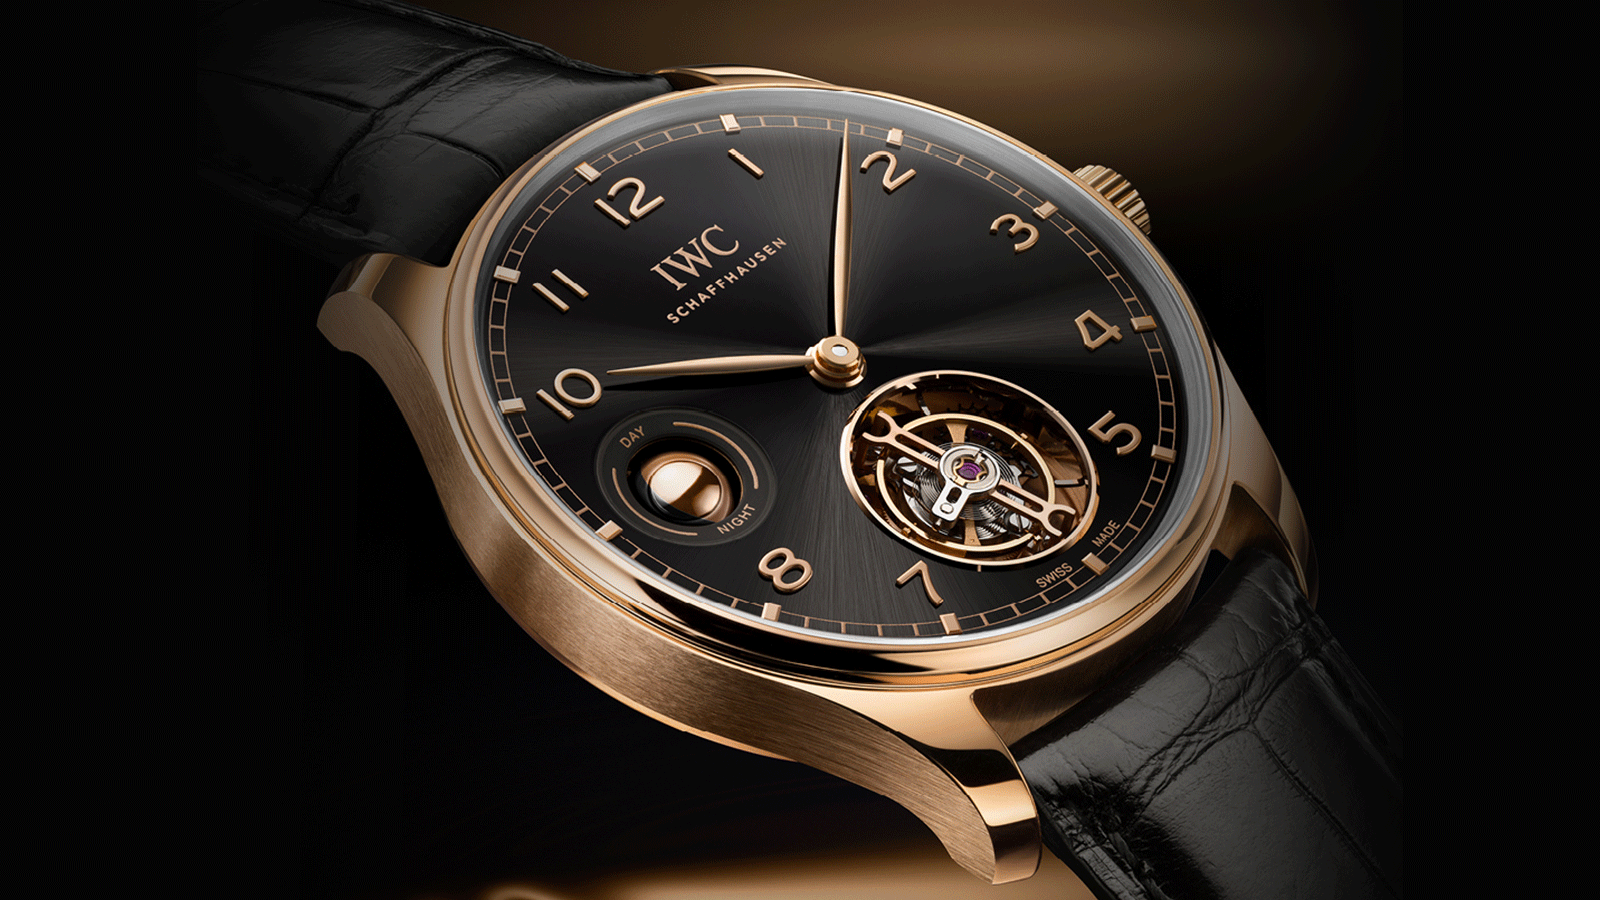 IWC Schaffhausen introduces the Portugieser Hand-Wound Tourbillon Day & Night at Watches and Wonders Geneva. It combines an 18-carat Armor Gold® case with an Obsidian lacquered dial and gold-plated hands and gold appliques.